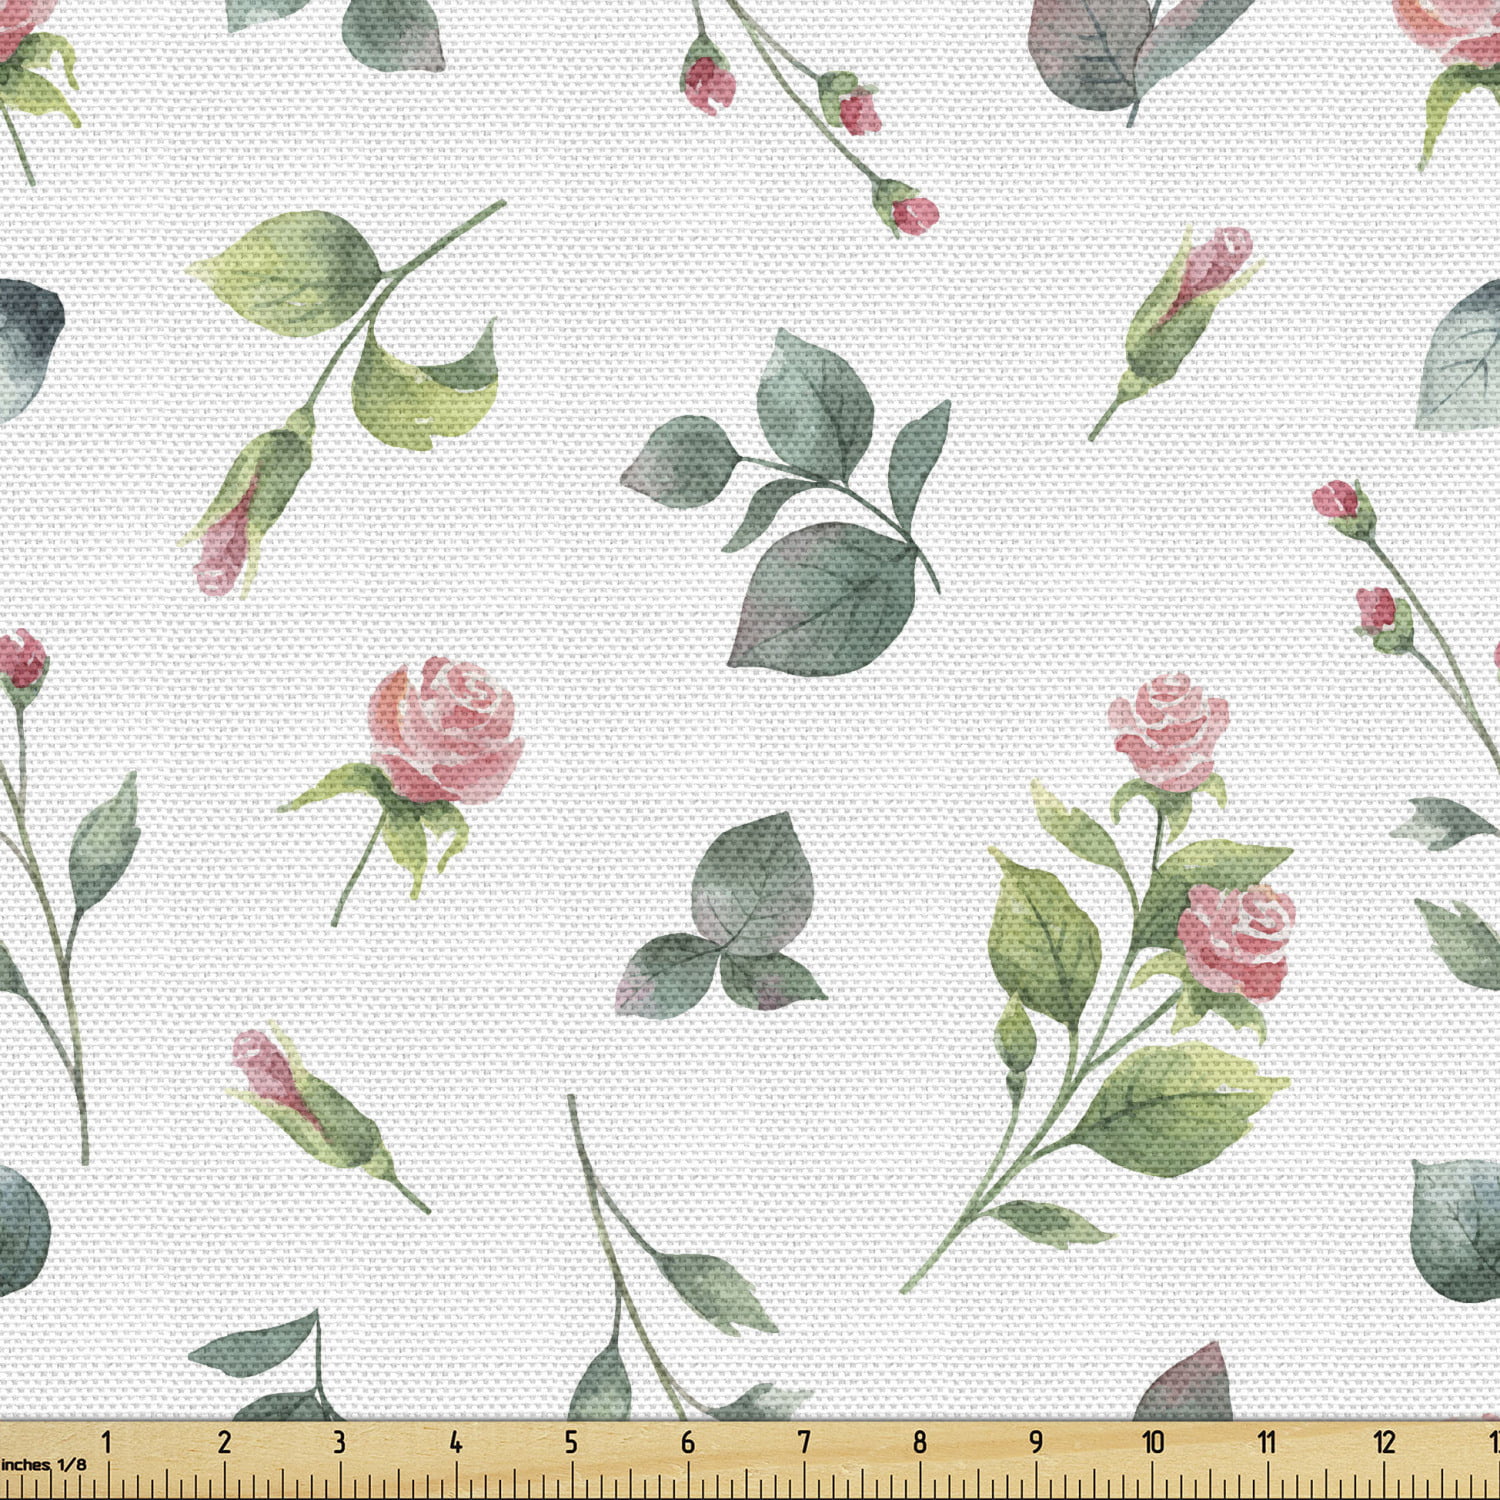 East Urban Home Ambesonne Rose Fabric by The Yard, Watercolor Painting Look Roses Peonies Botanical Romantic Bouquet Corsage, Decorative Fabric for Upholstery and HOM